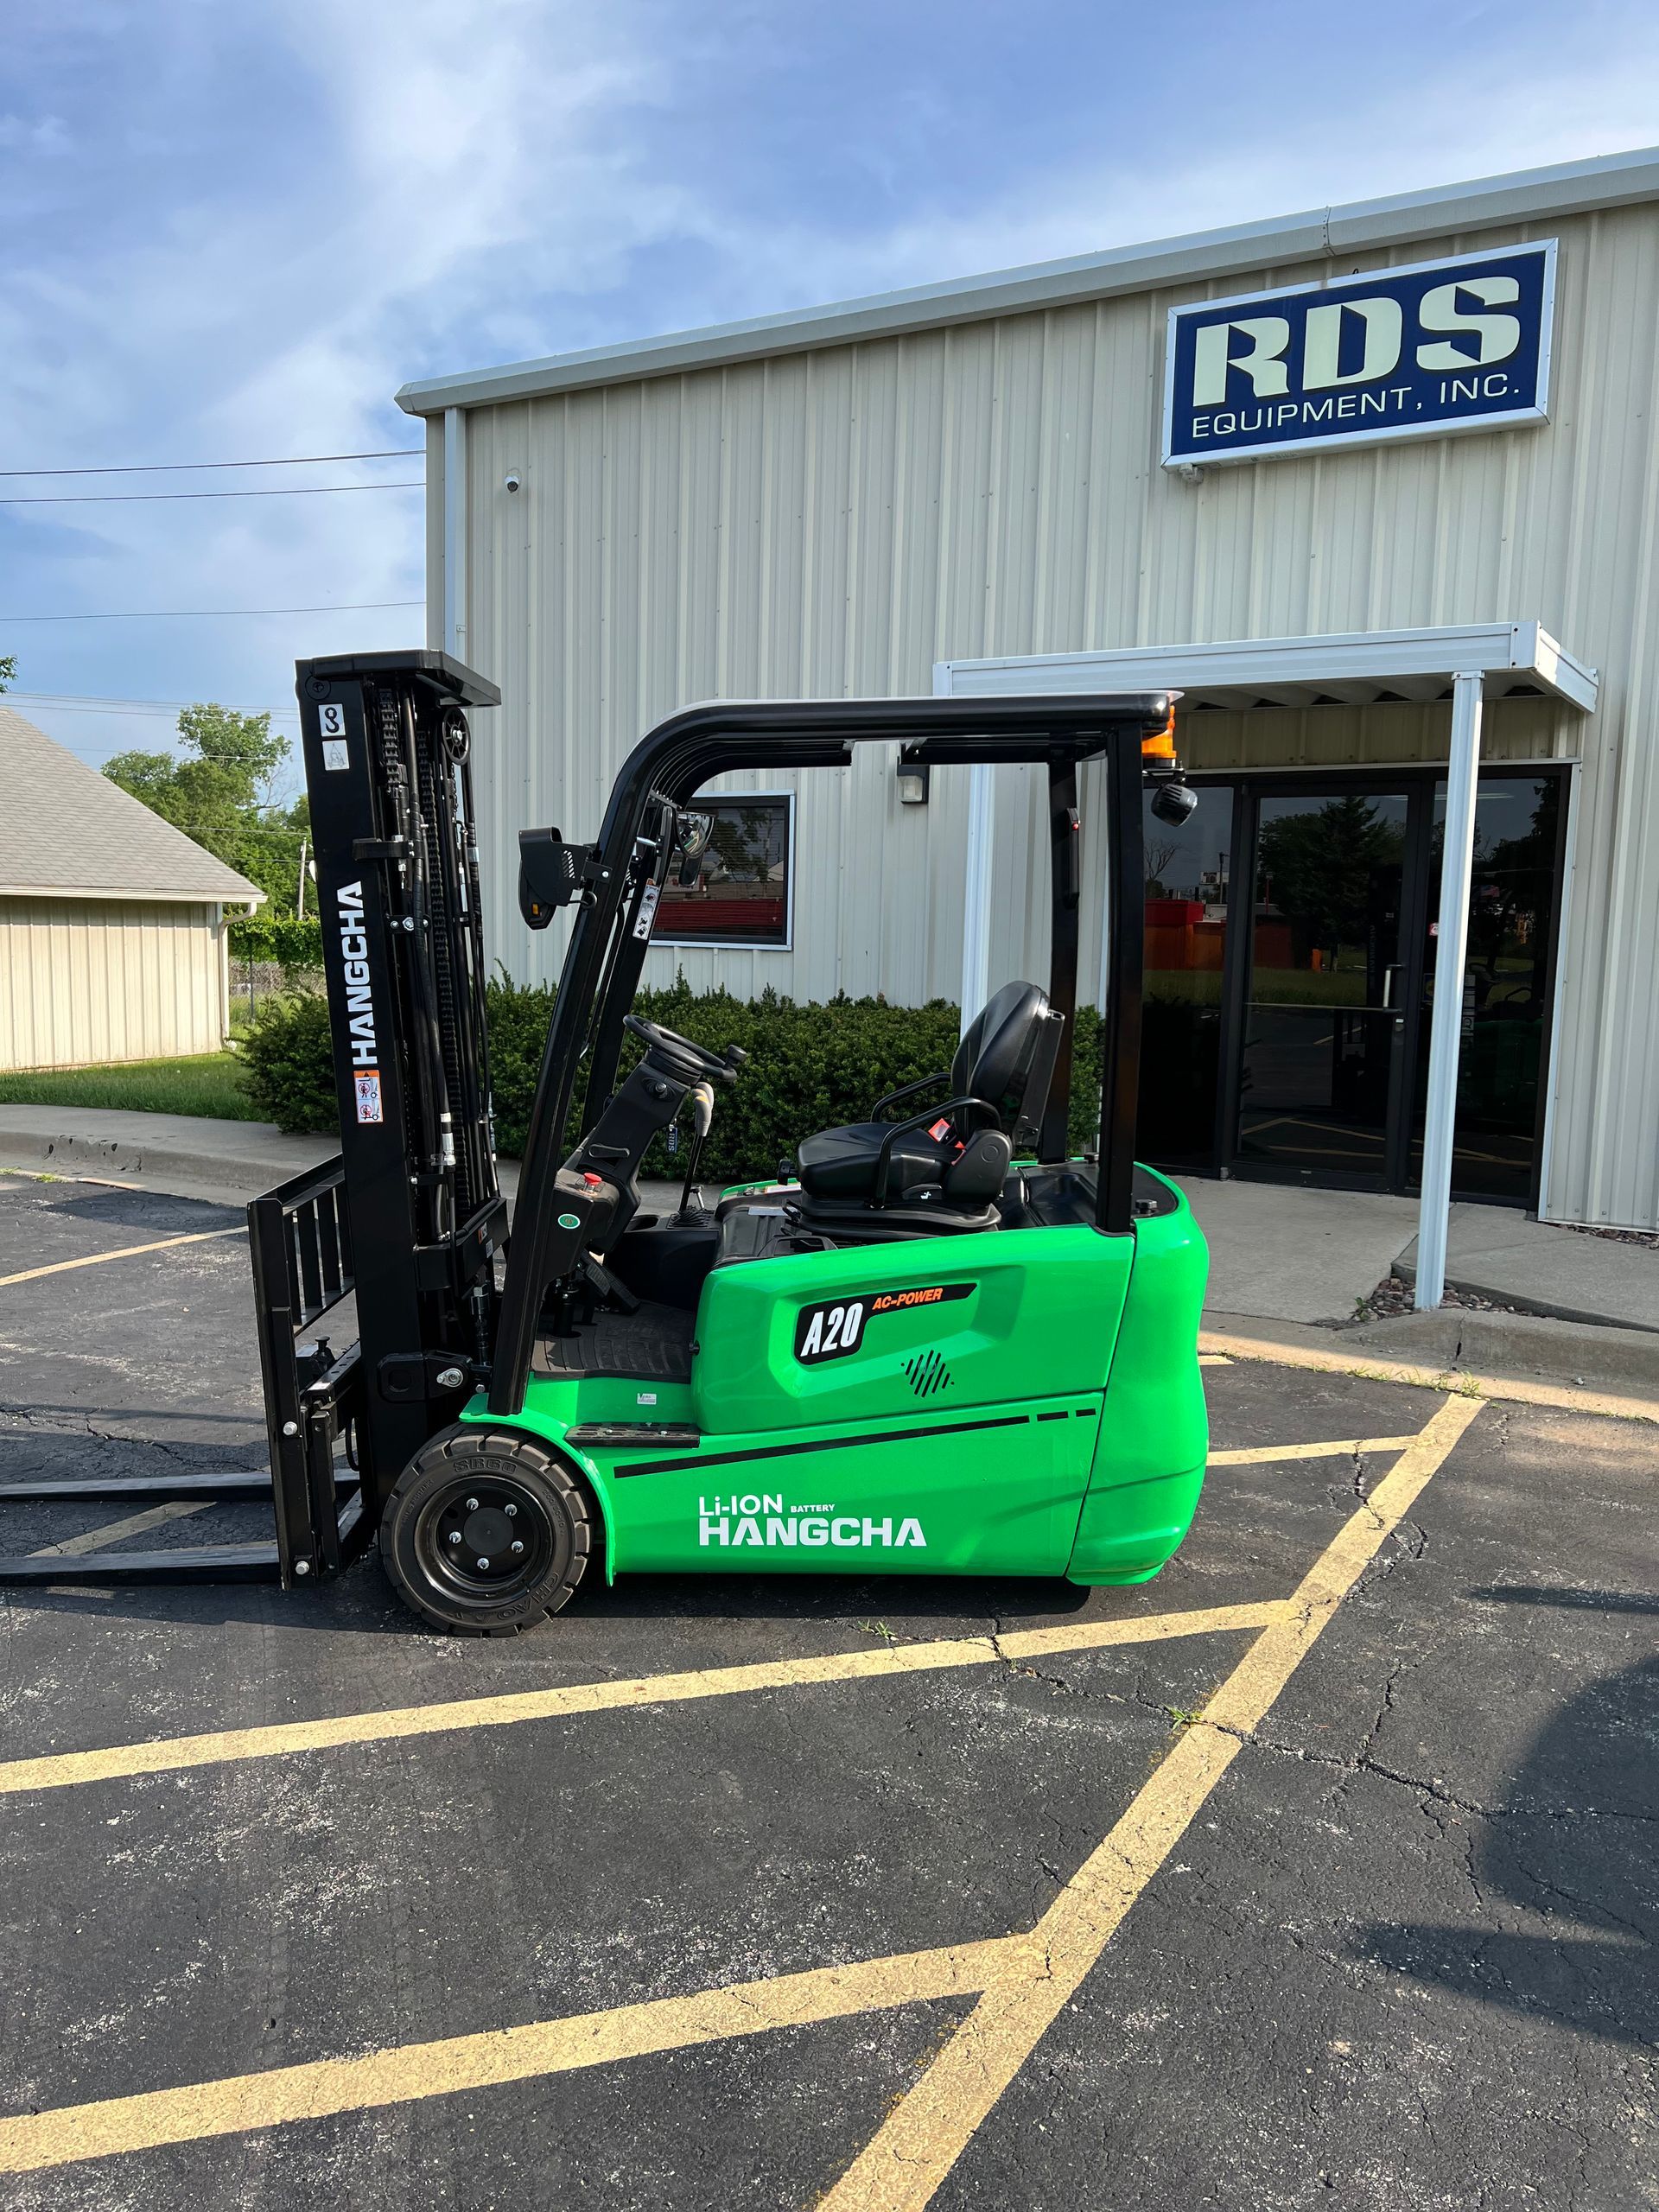 Crown C5 - Forklifts, Utility and Golf Carts in Independence, MO